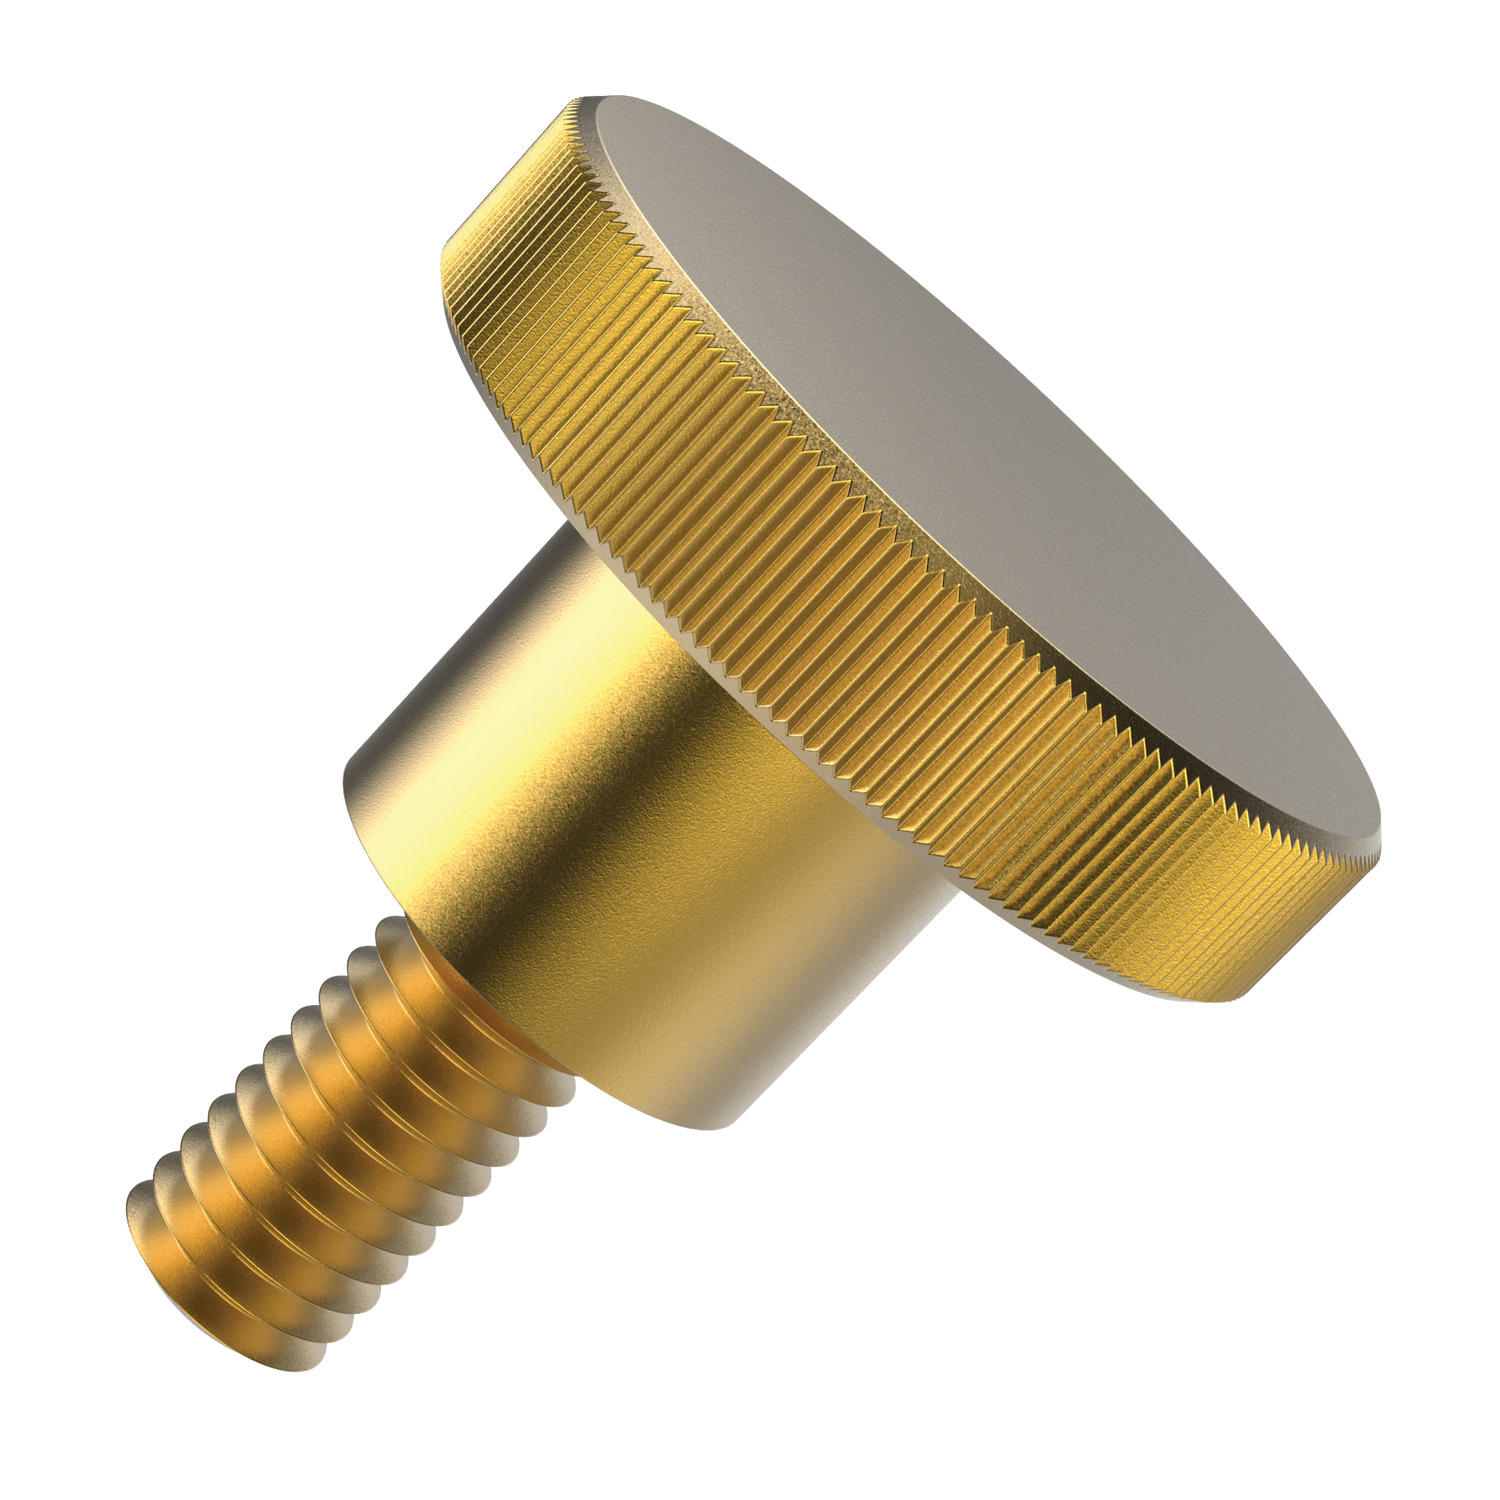 Brass Knurled Thumb Screws Brass thumb screws manufactured to DIN 464. Available in two variations, flat and knurled.